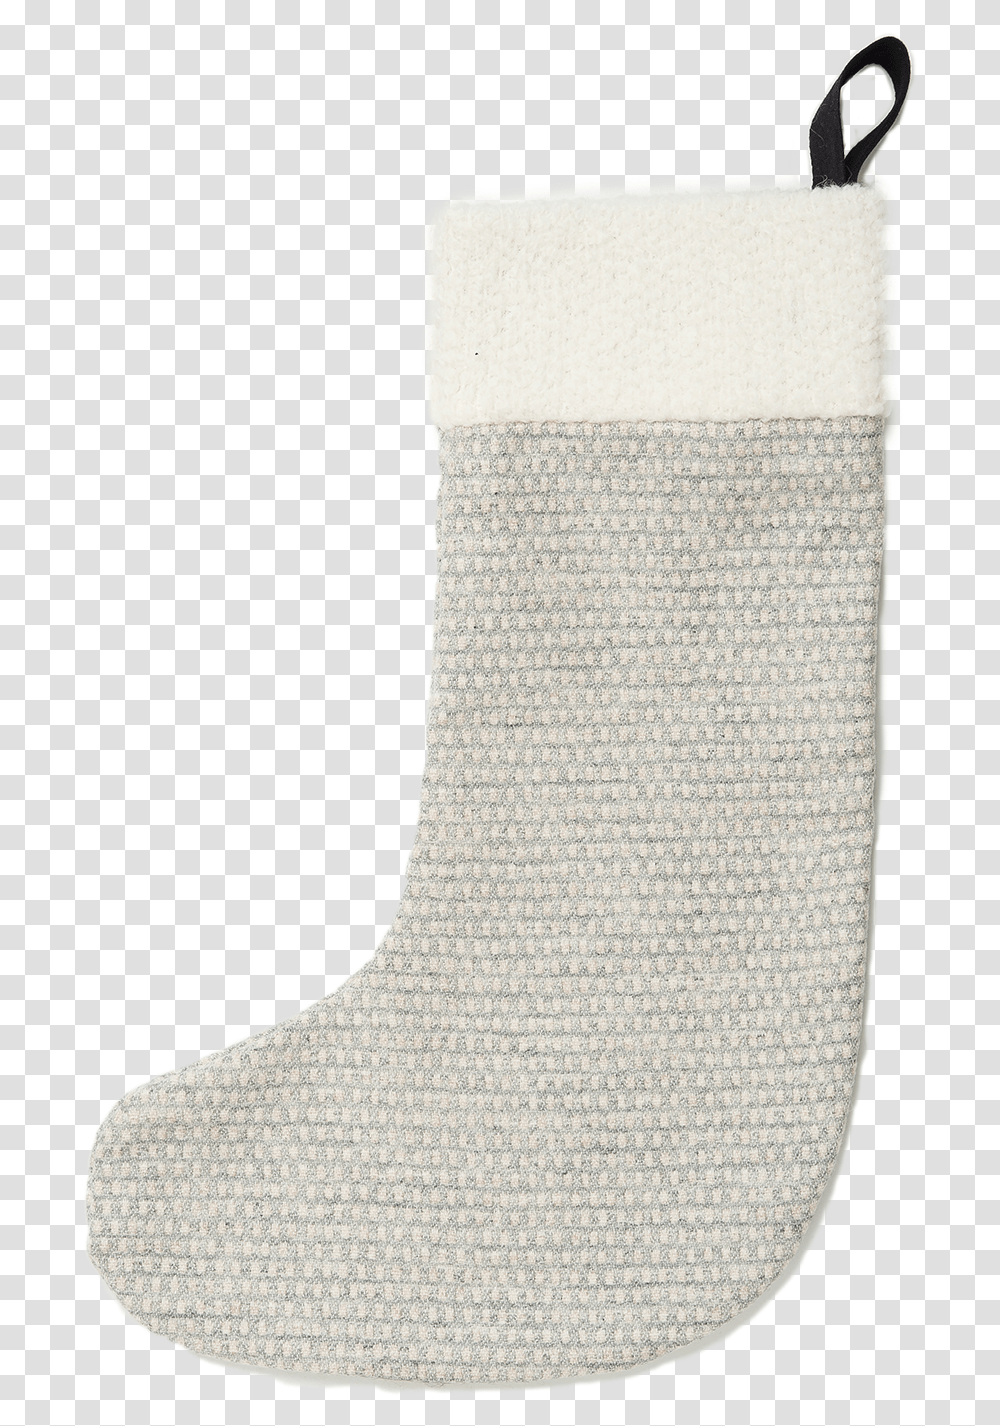 Download Lambswool Christmas Stocking Image With No Sock, Rug, Gift Transparent Png